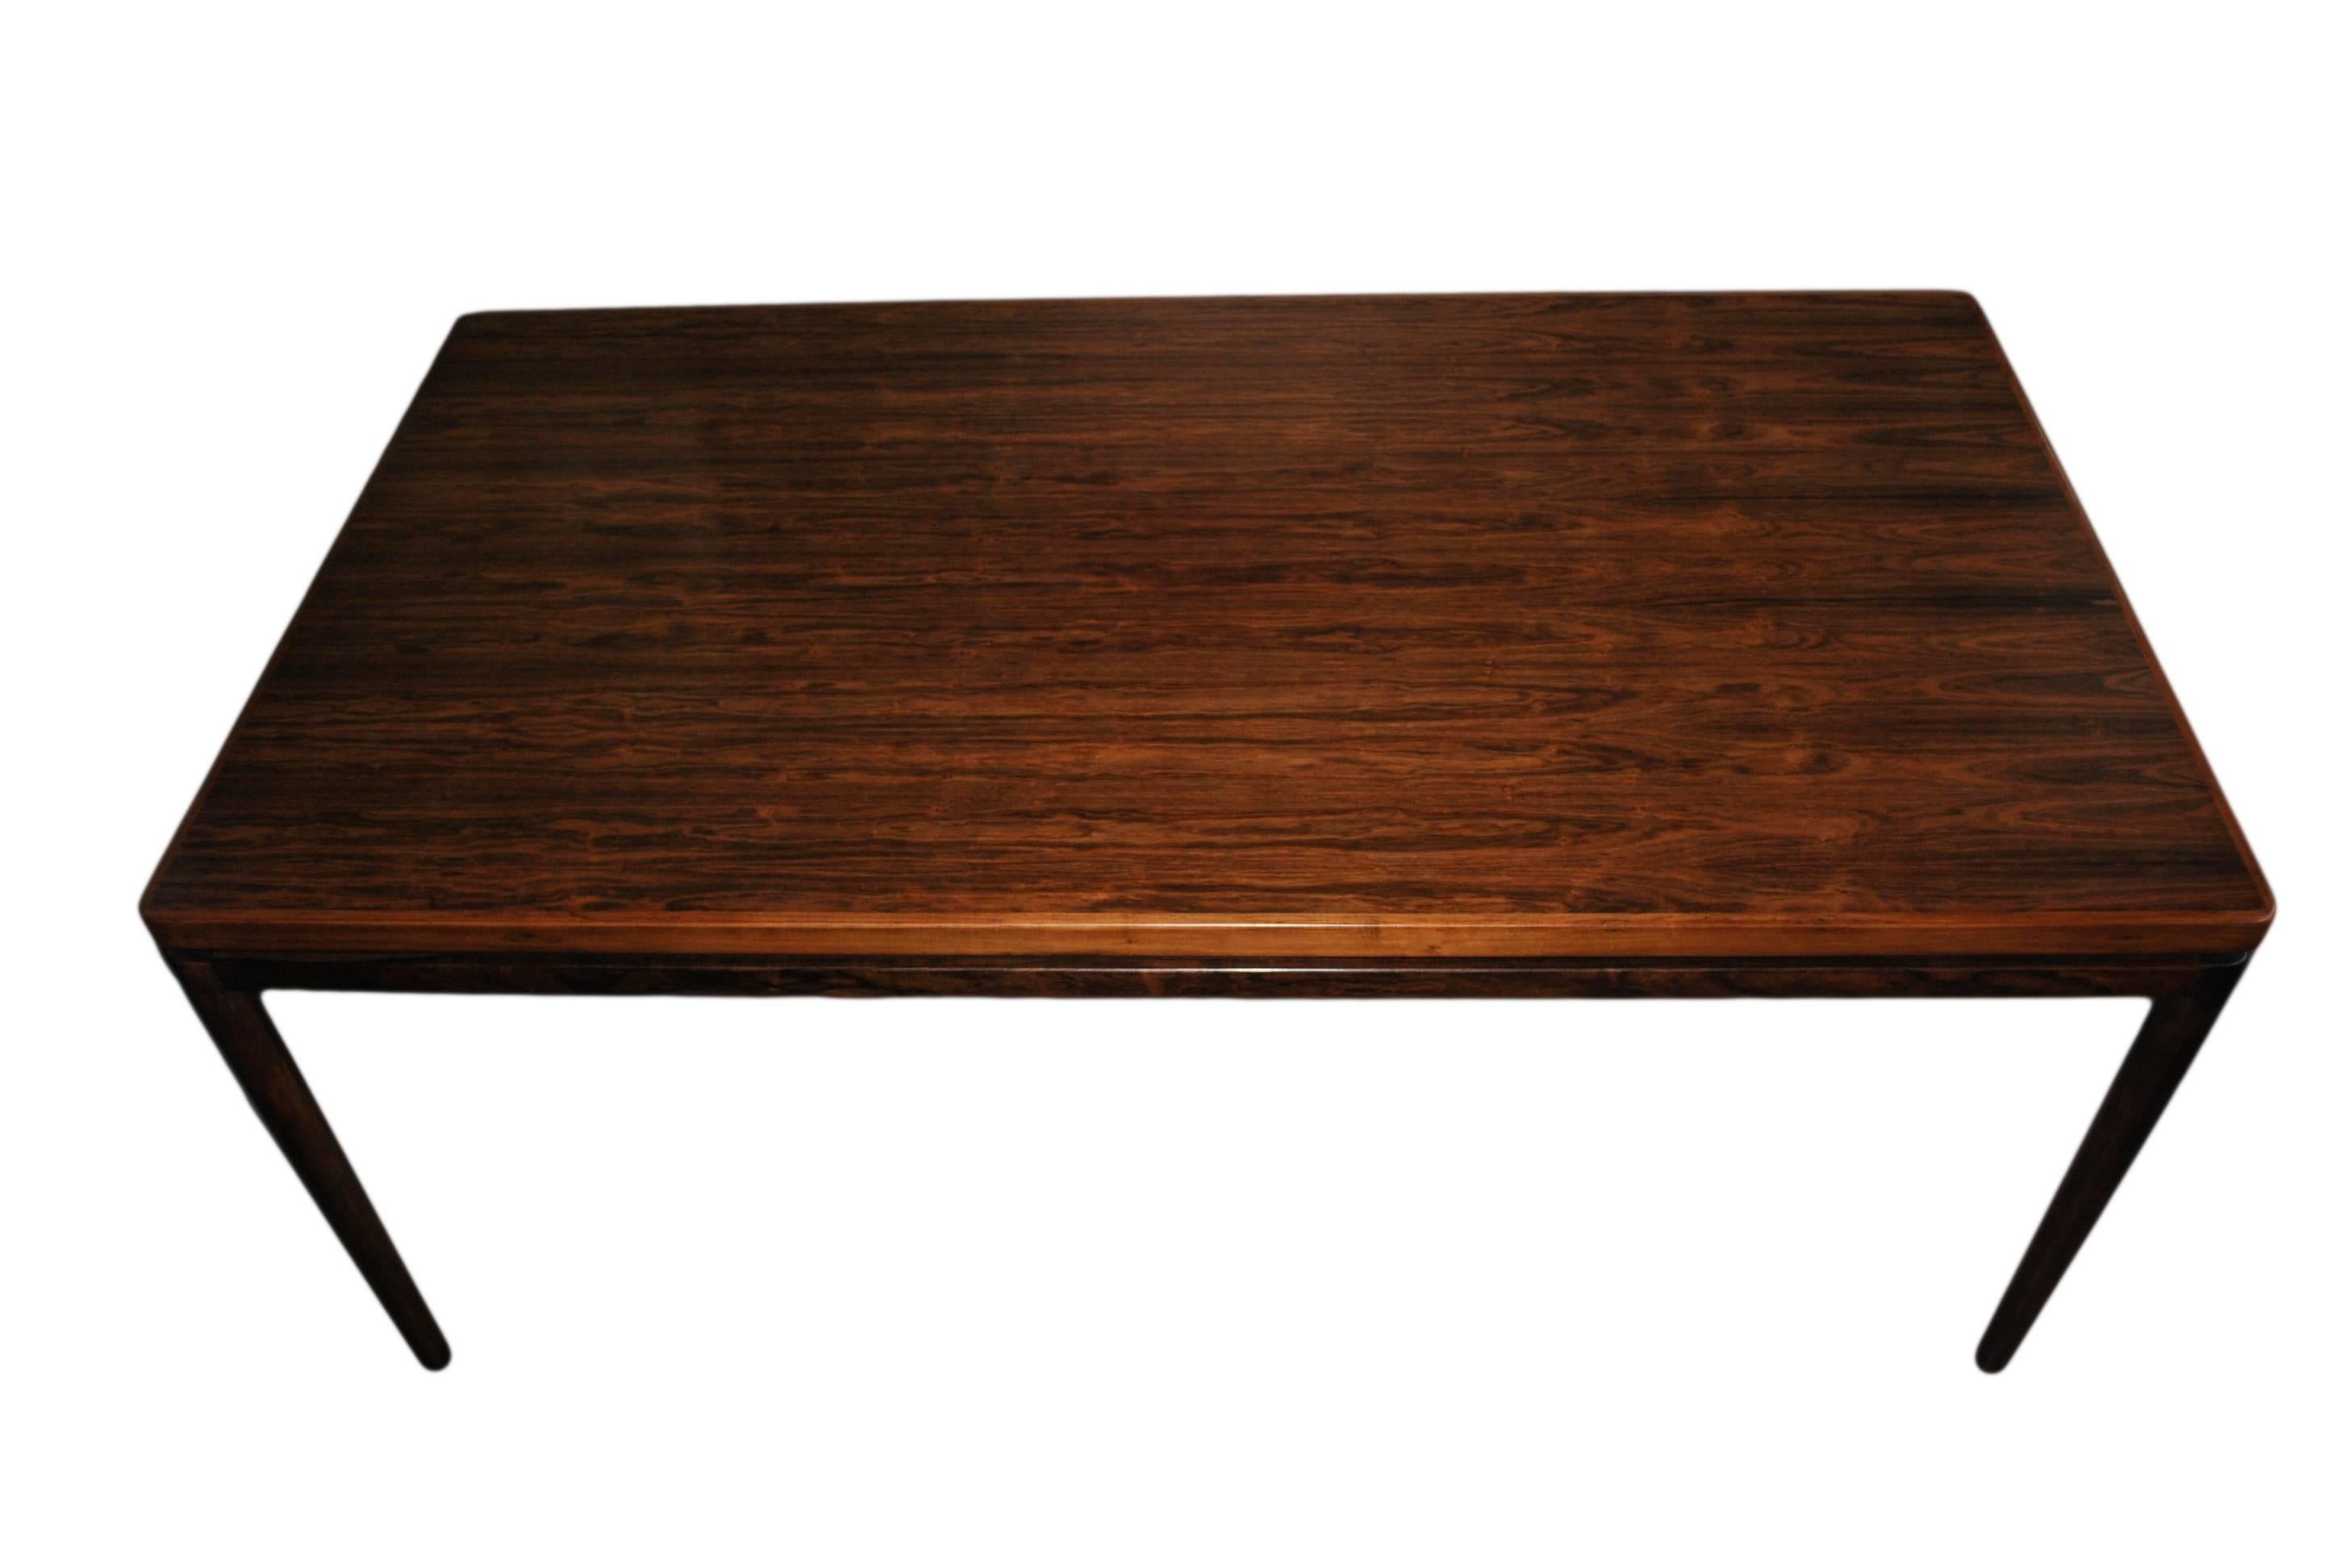 Brazilian rosewood dining table designed by Johannes Andersen for Christian Linneberg, Denmark, circa 1960. Finest quality. Large size table that comfortably seats 8 to 12 (ext). Table extends via hidden slides and leaves. Each extending leaf is